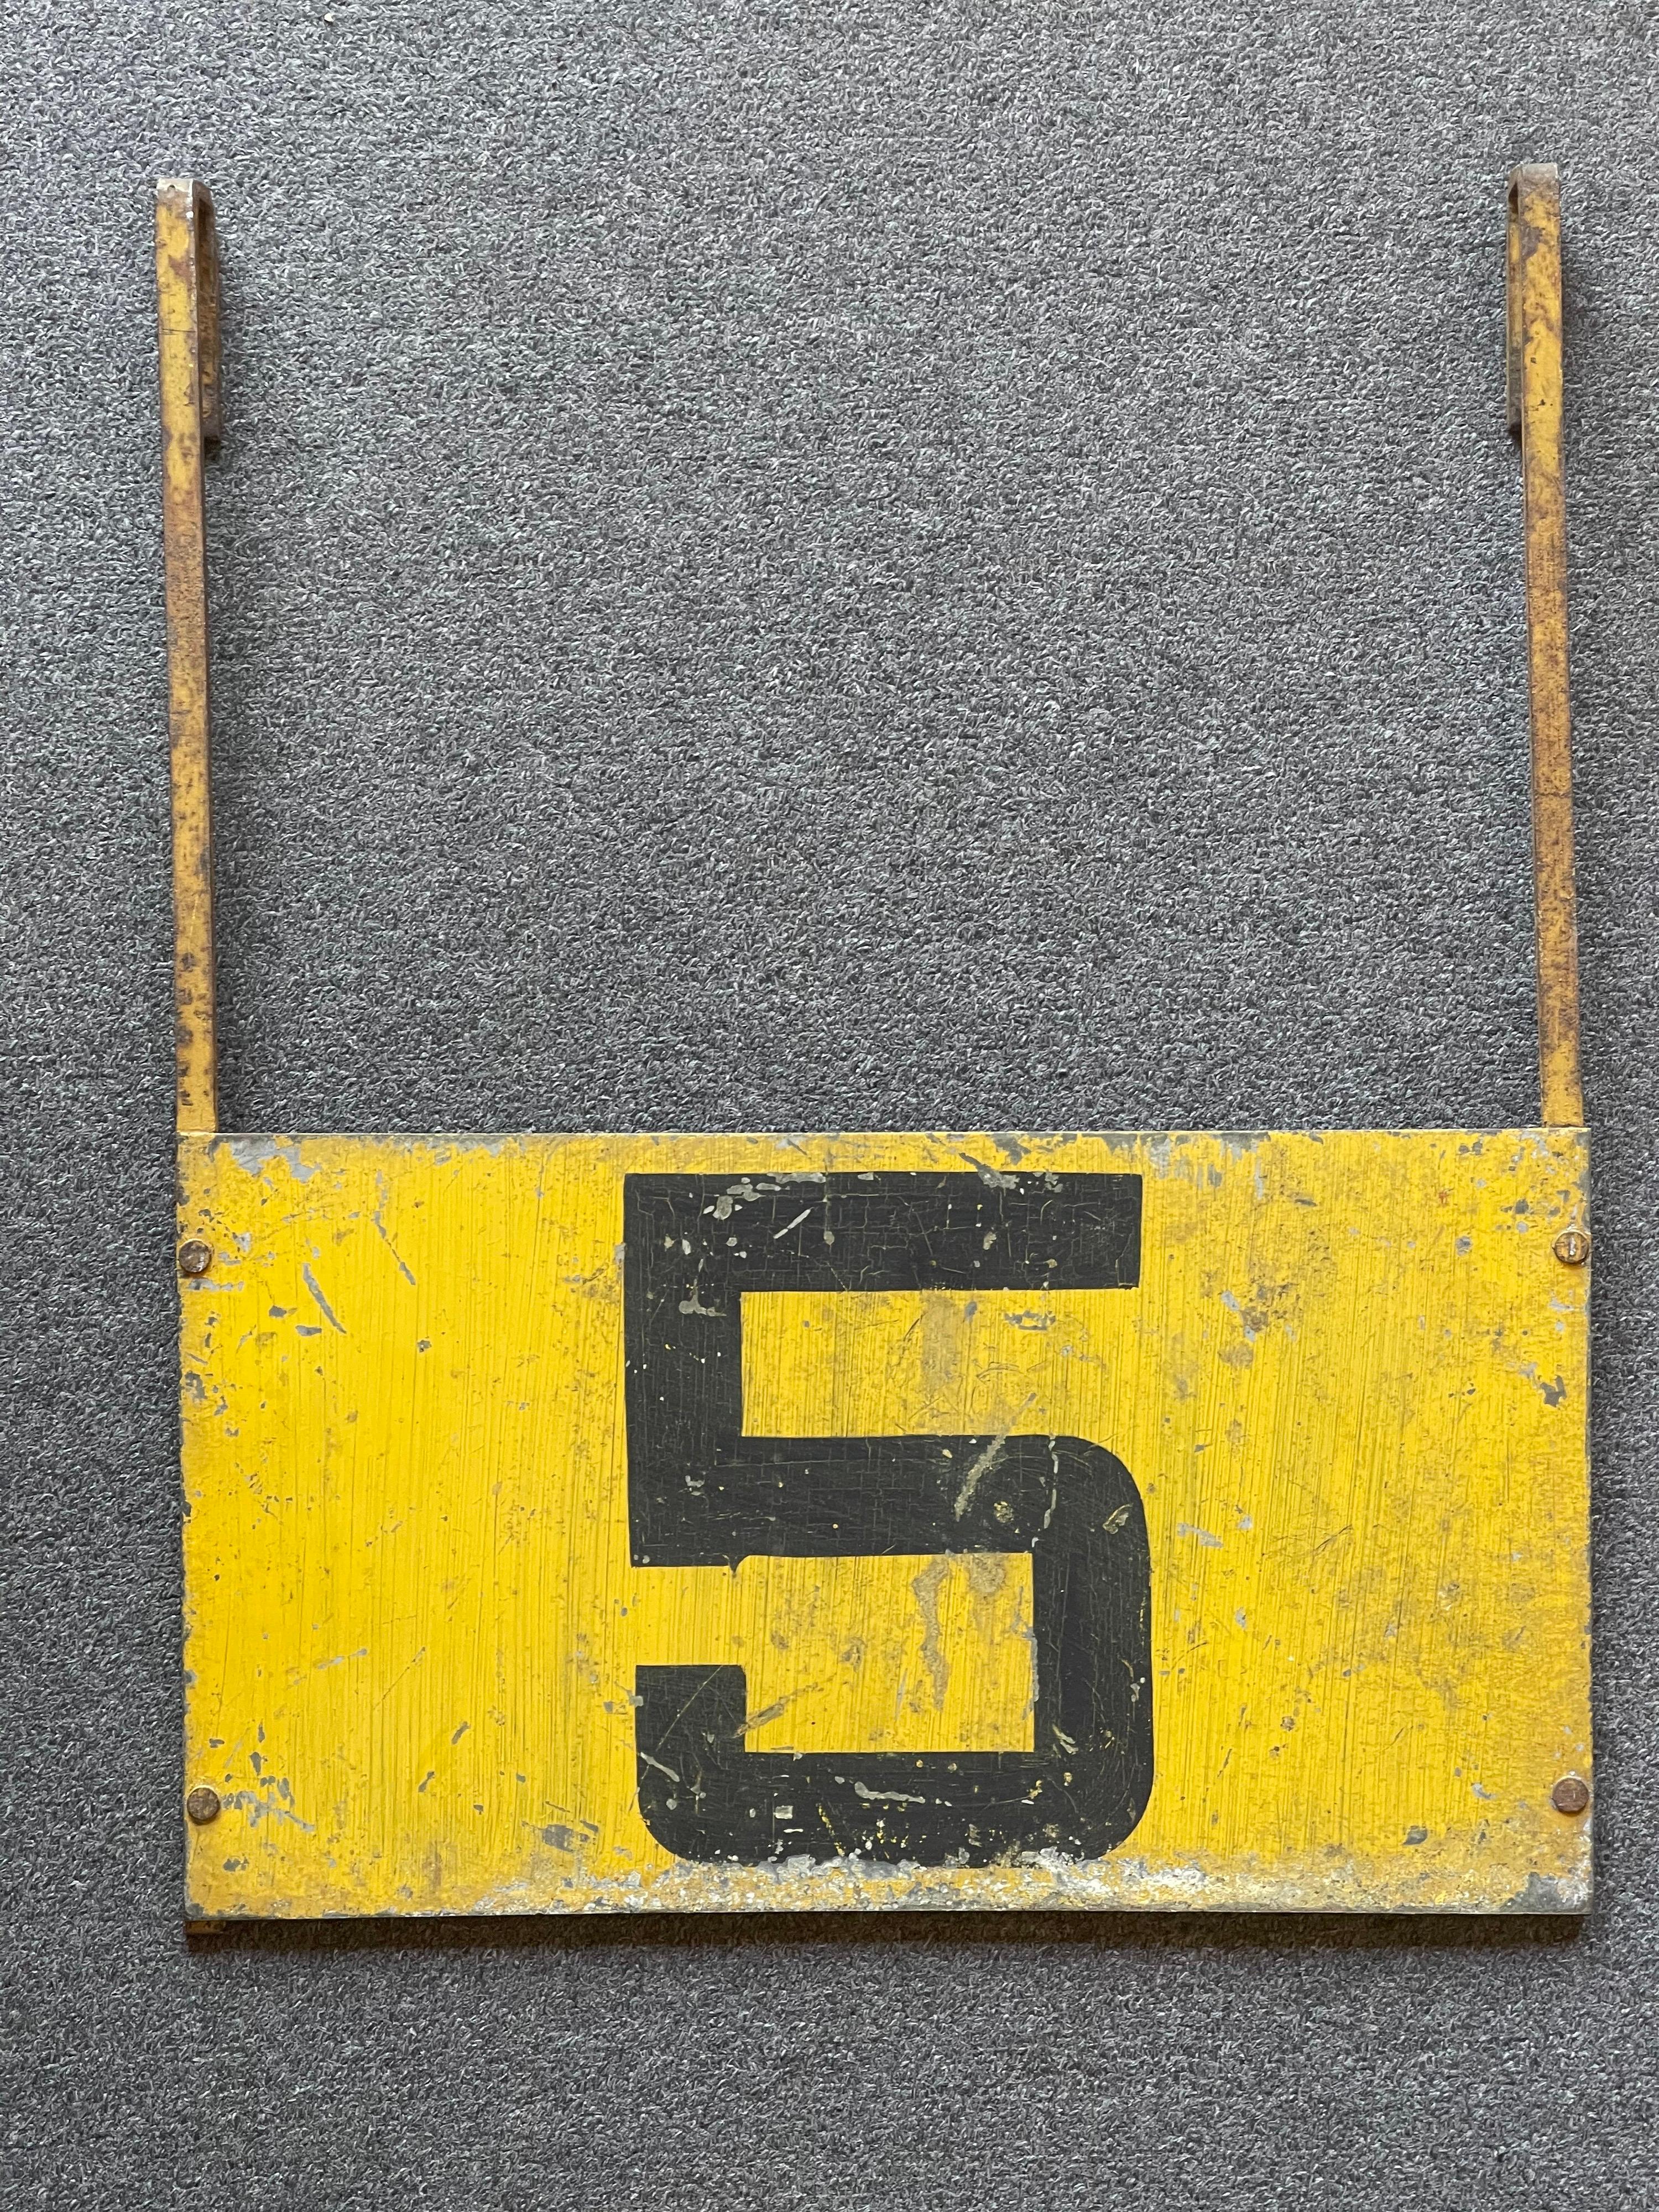 Super cool and hard to find vintage Swiss two sided train signal sign, circa 1940s. The sign is made of metal and painted yellow with the number 